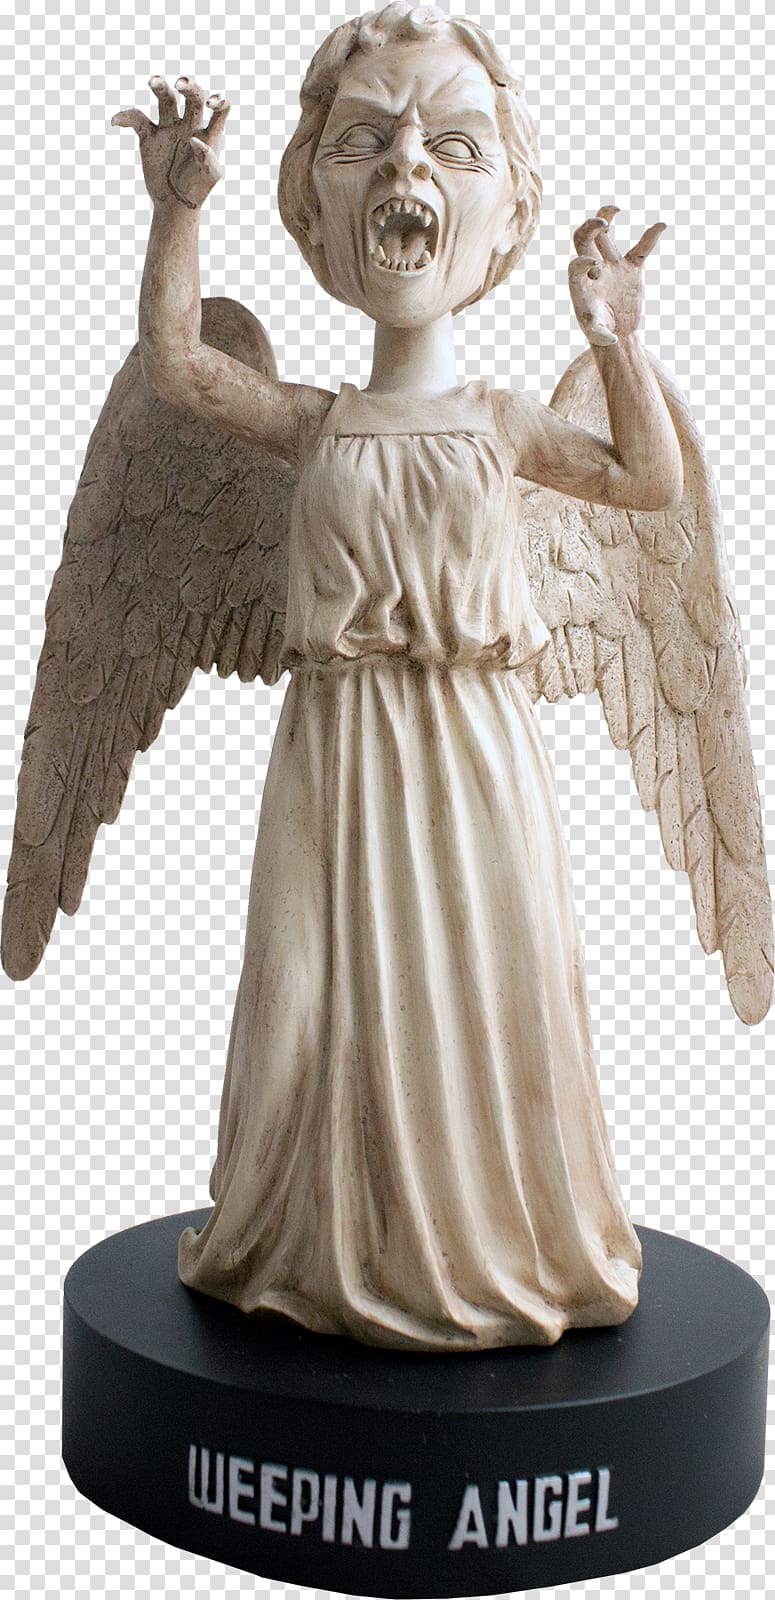 Statue Doctor Weeping Angel Bobblehead Figurine, doctor head transparent background PNG clipart